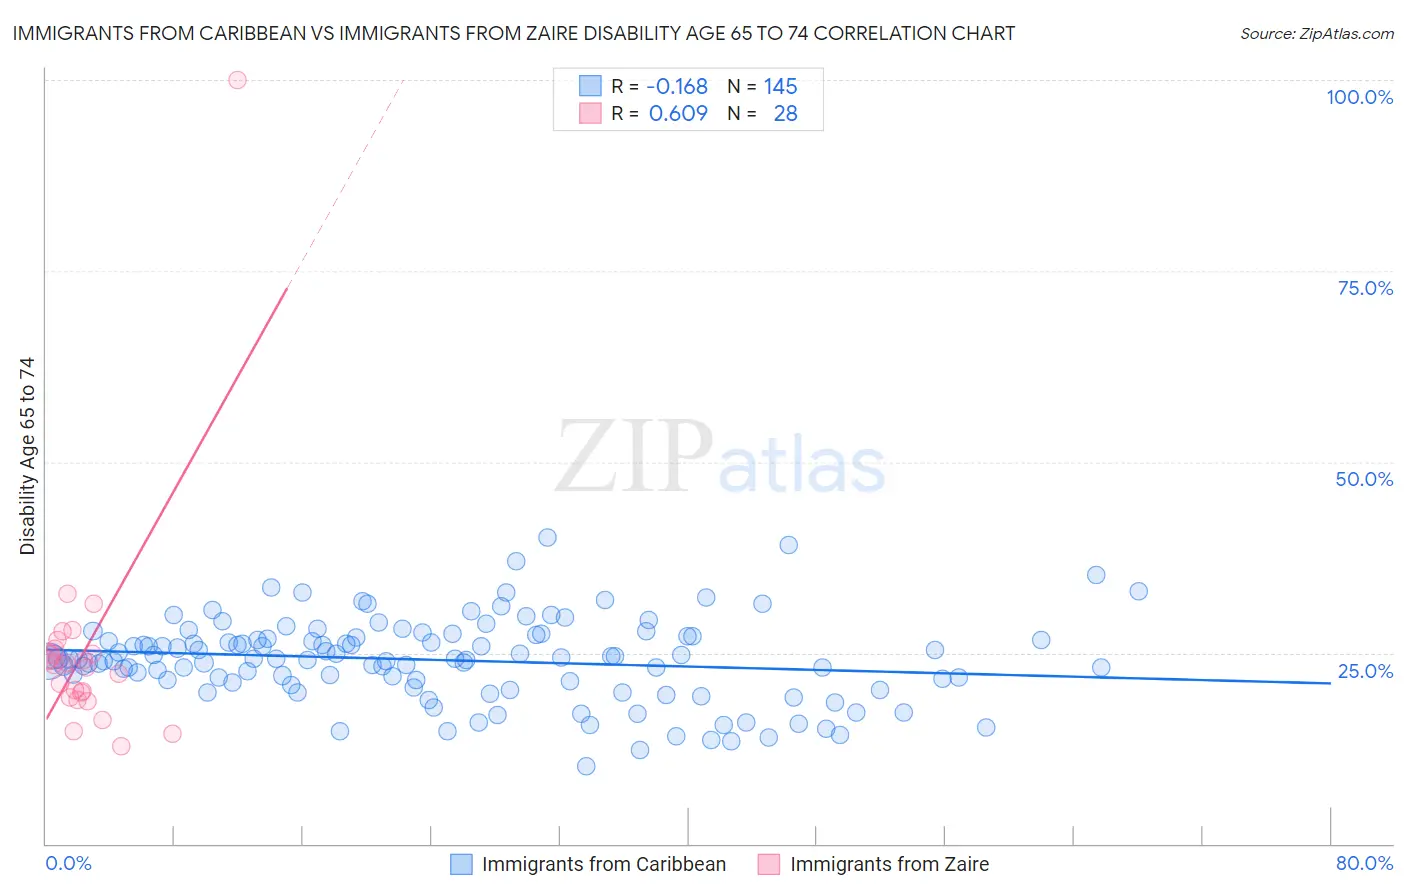 Immigrants from Caribbean vs Immigrants from Zaire Disability Age 65 to 74